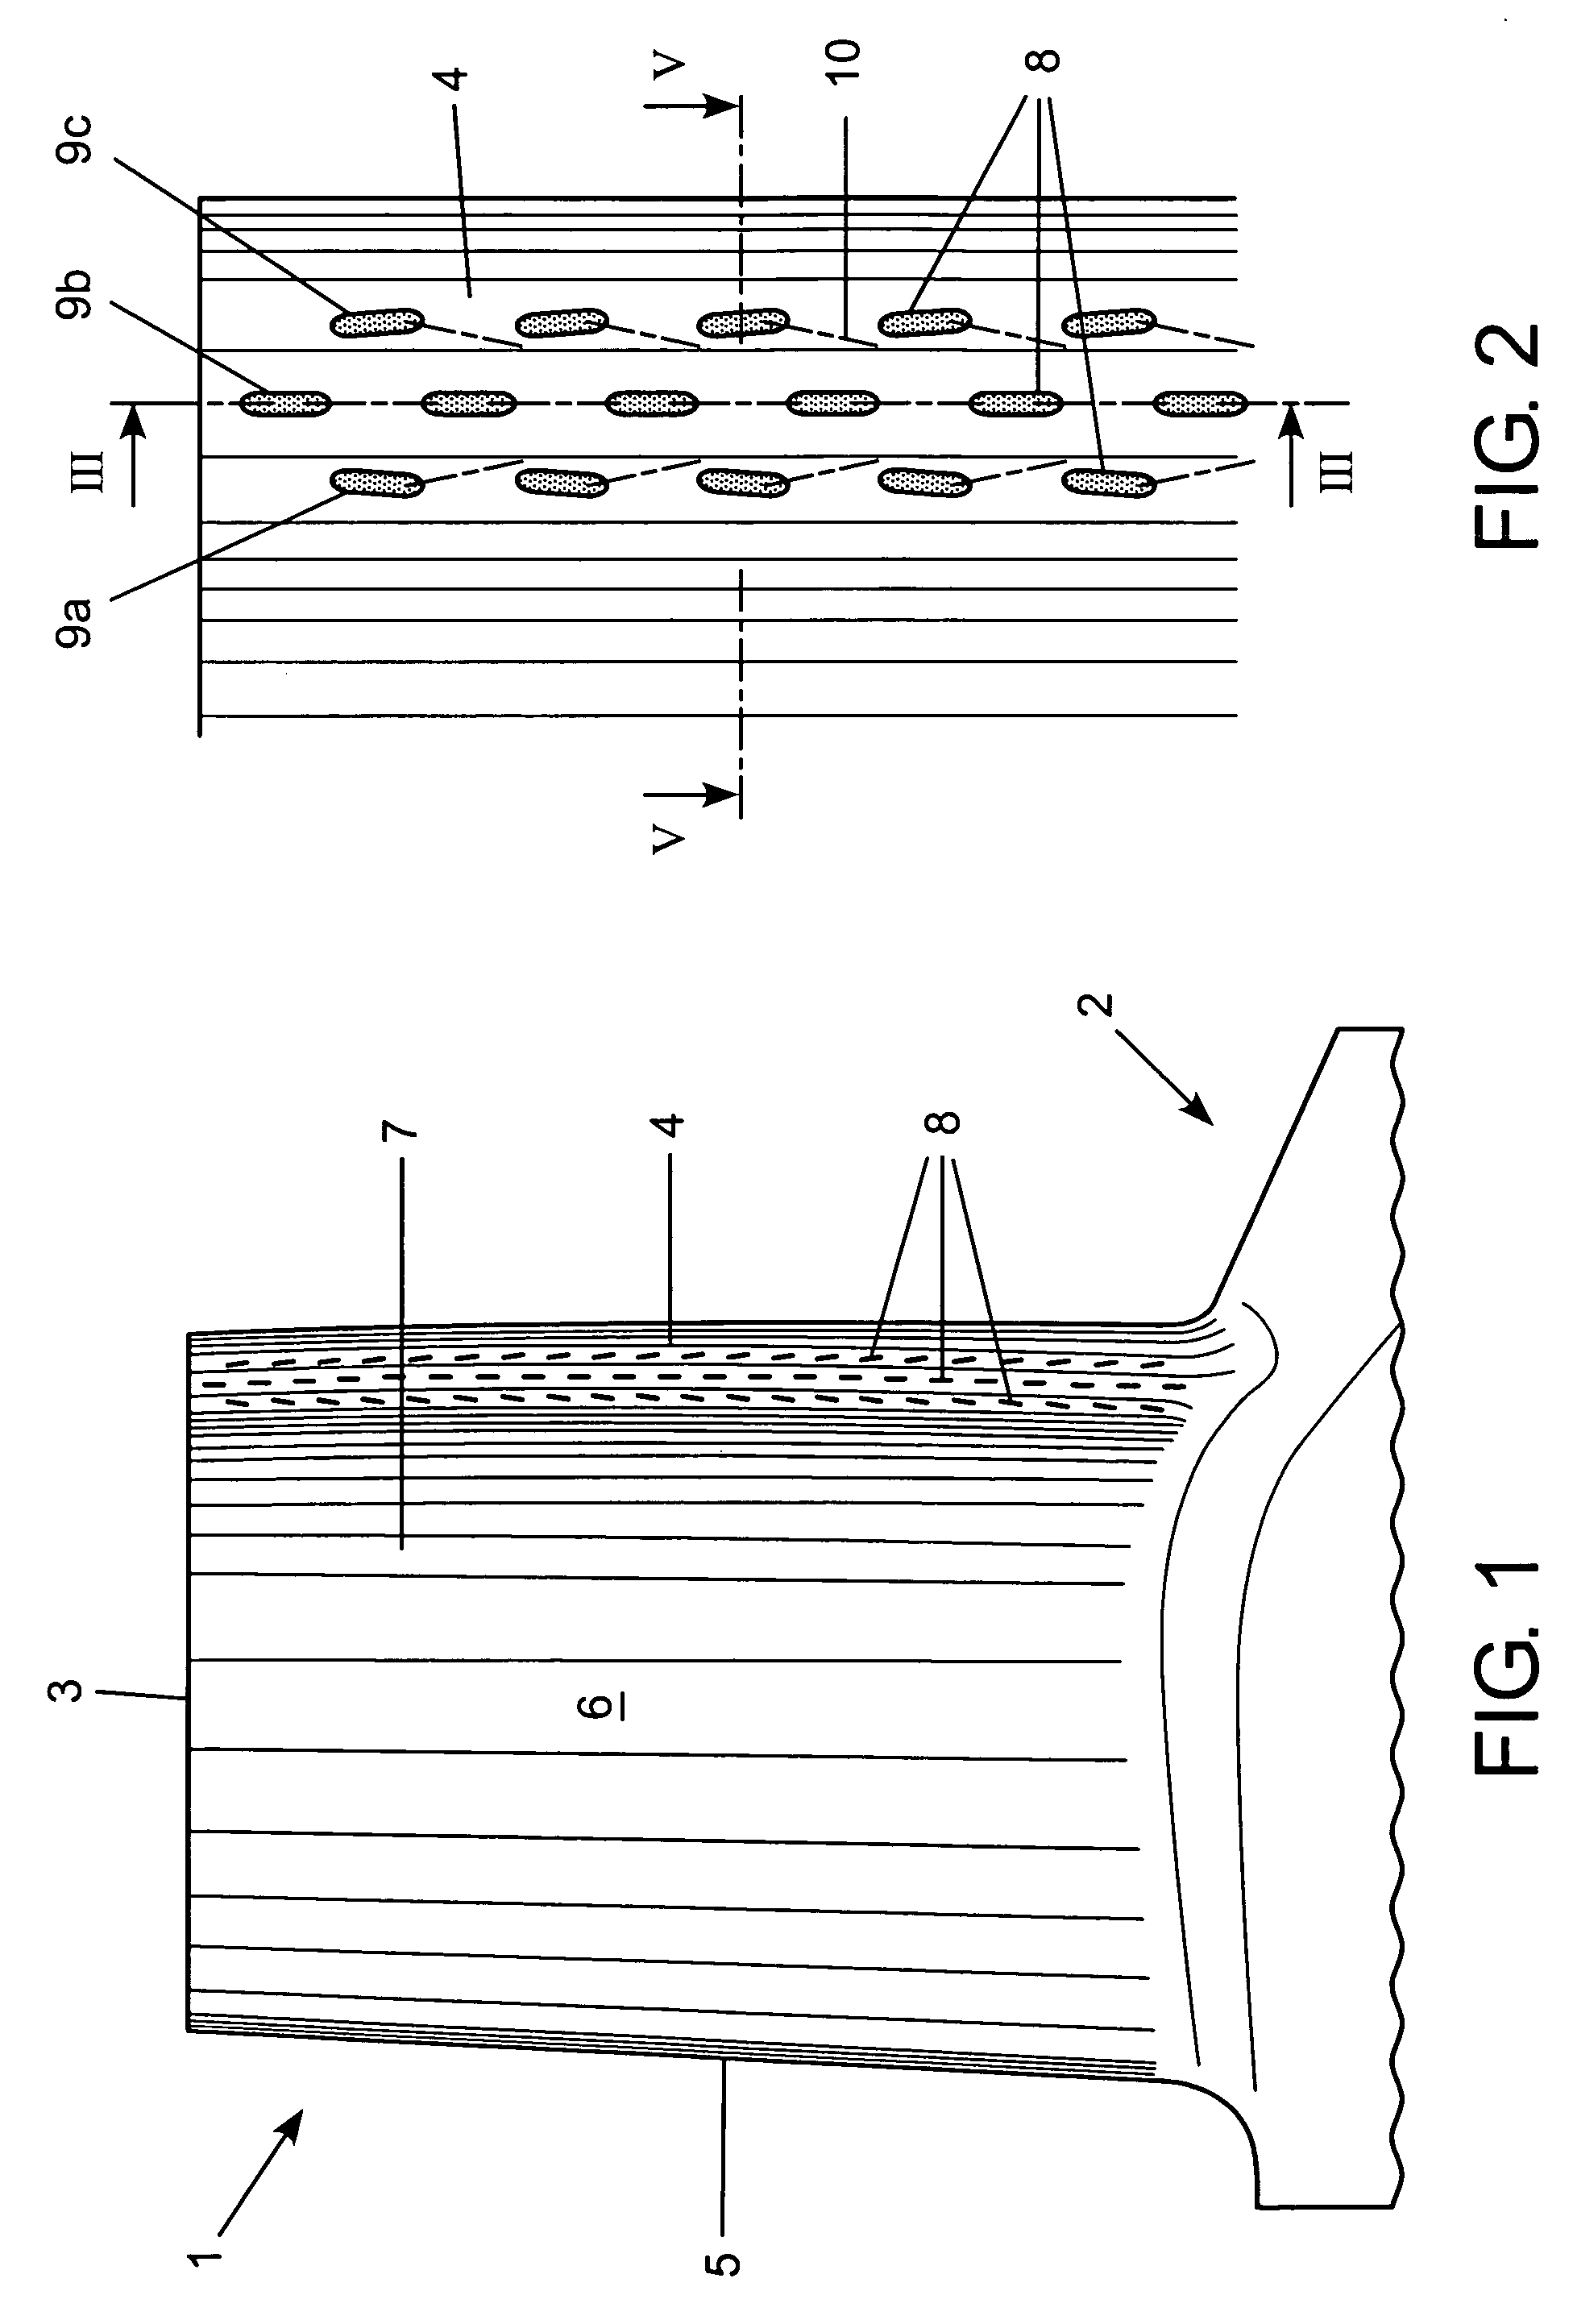 Gas turbine airfoil leading edge cooling construction